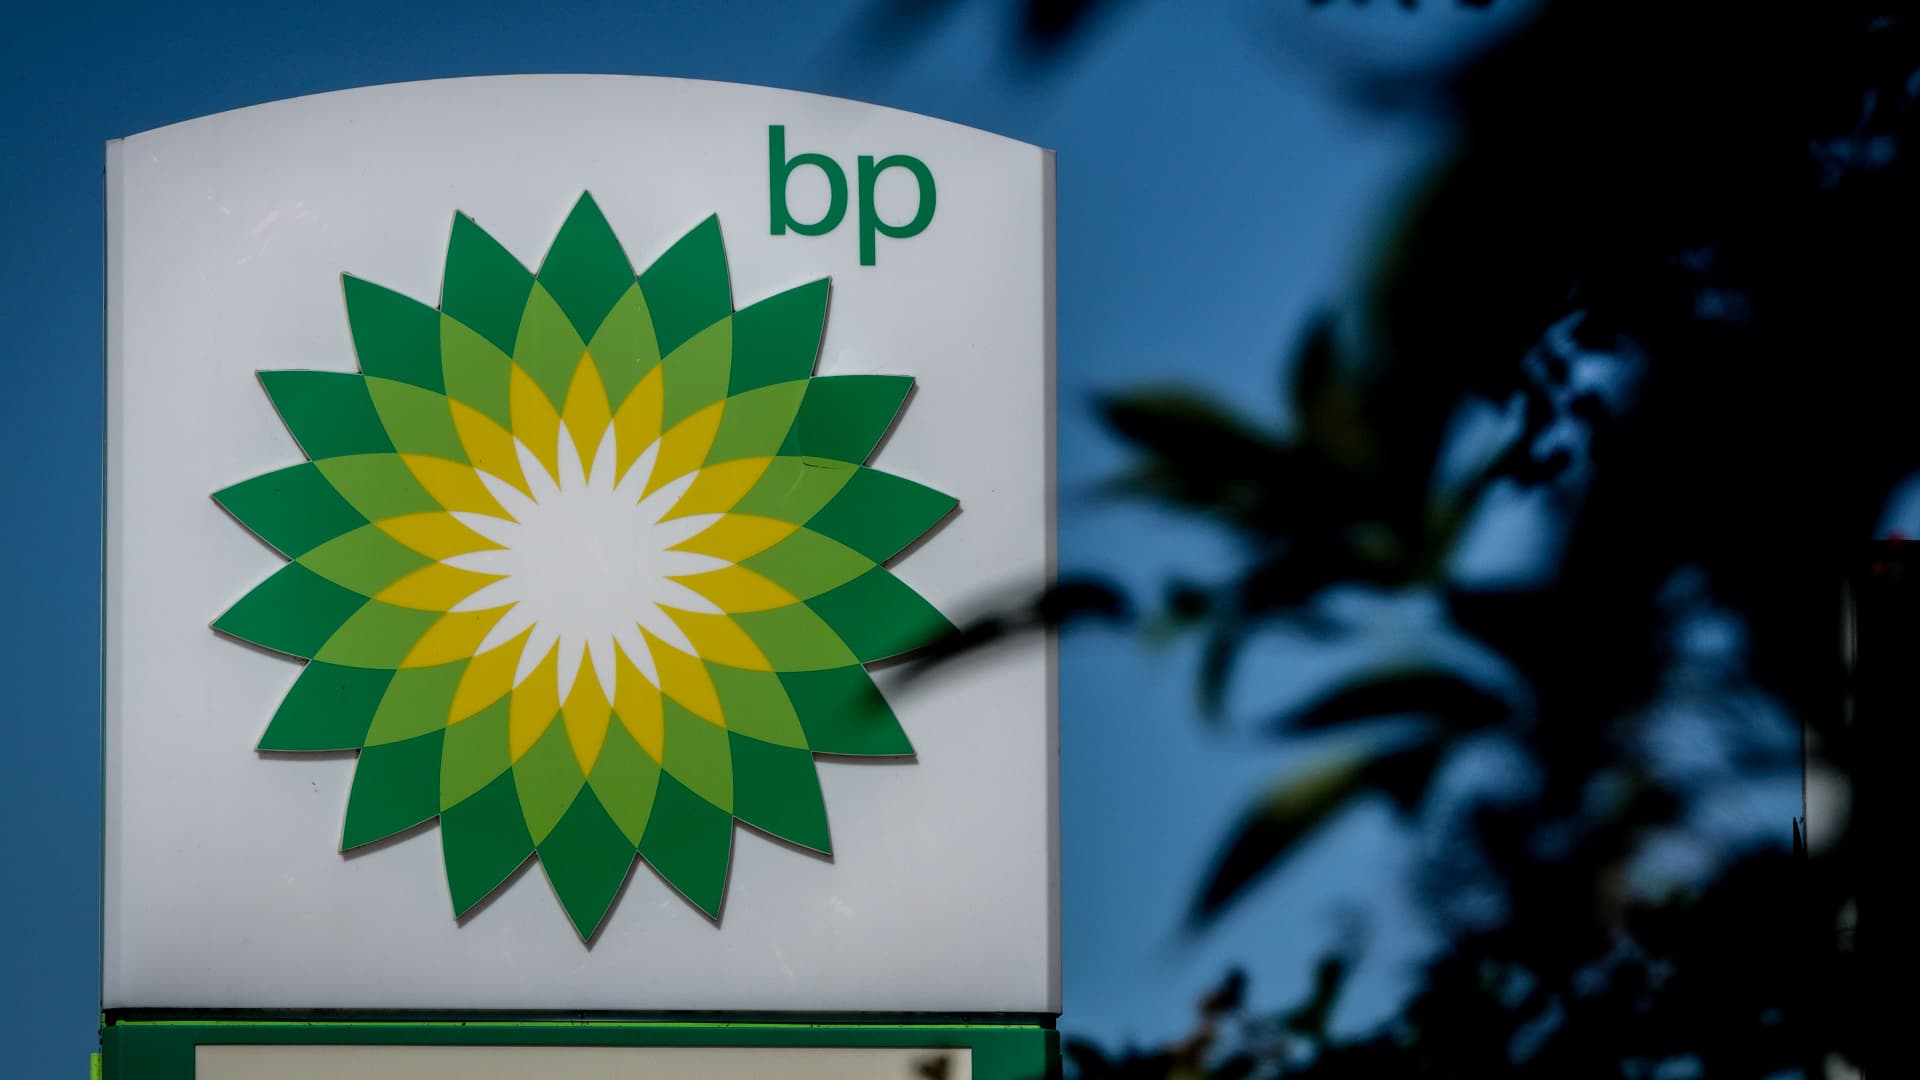 BP beats first-quarter profit expectations but shares slide 5% on slowing buyback program